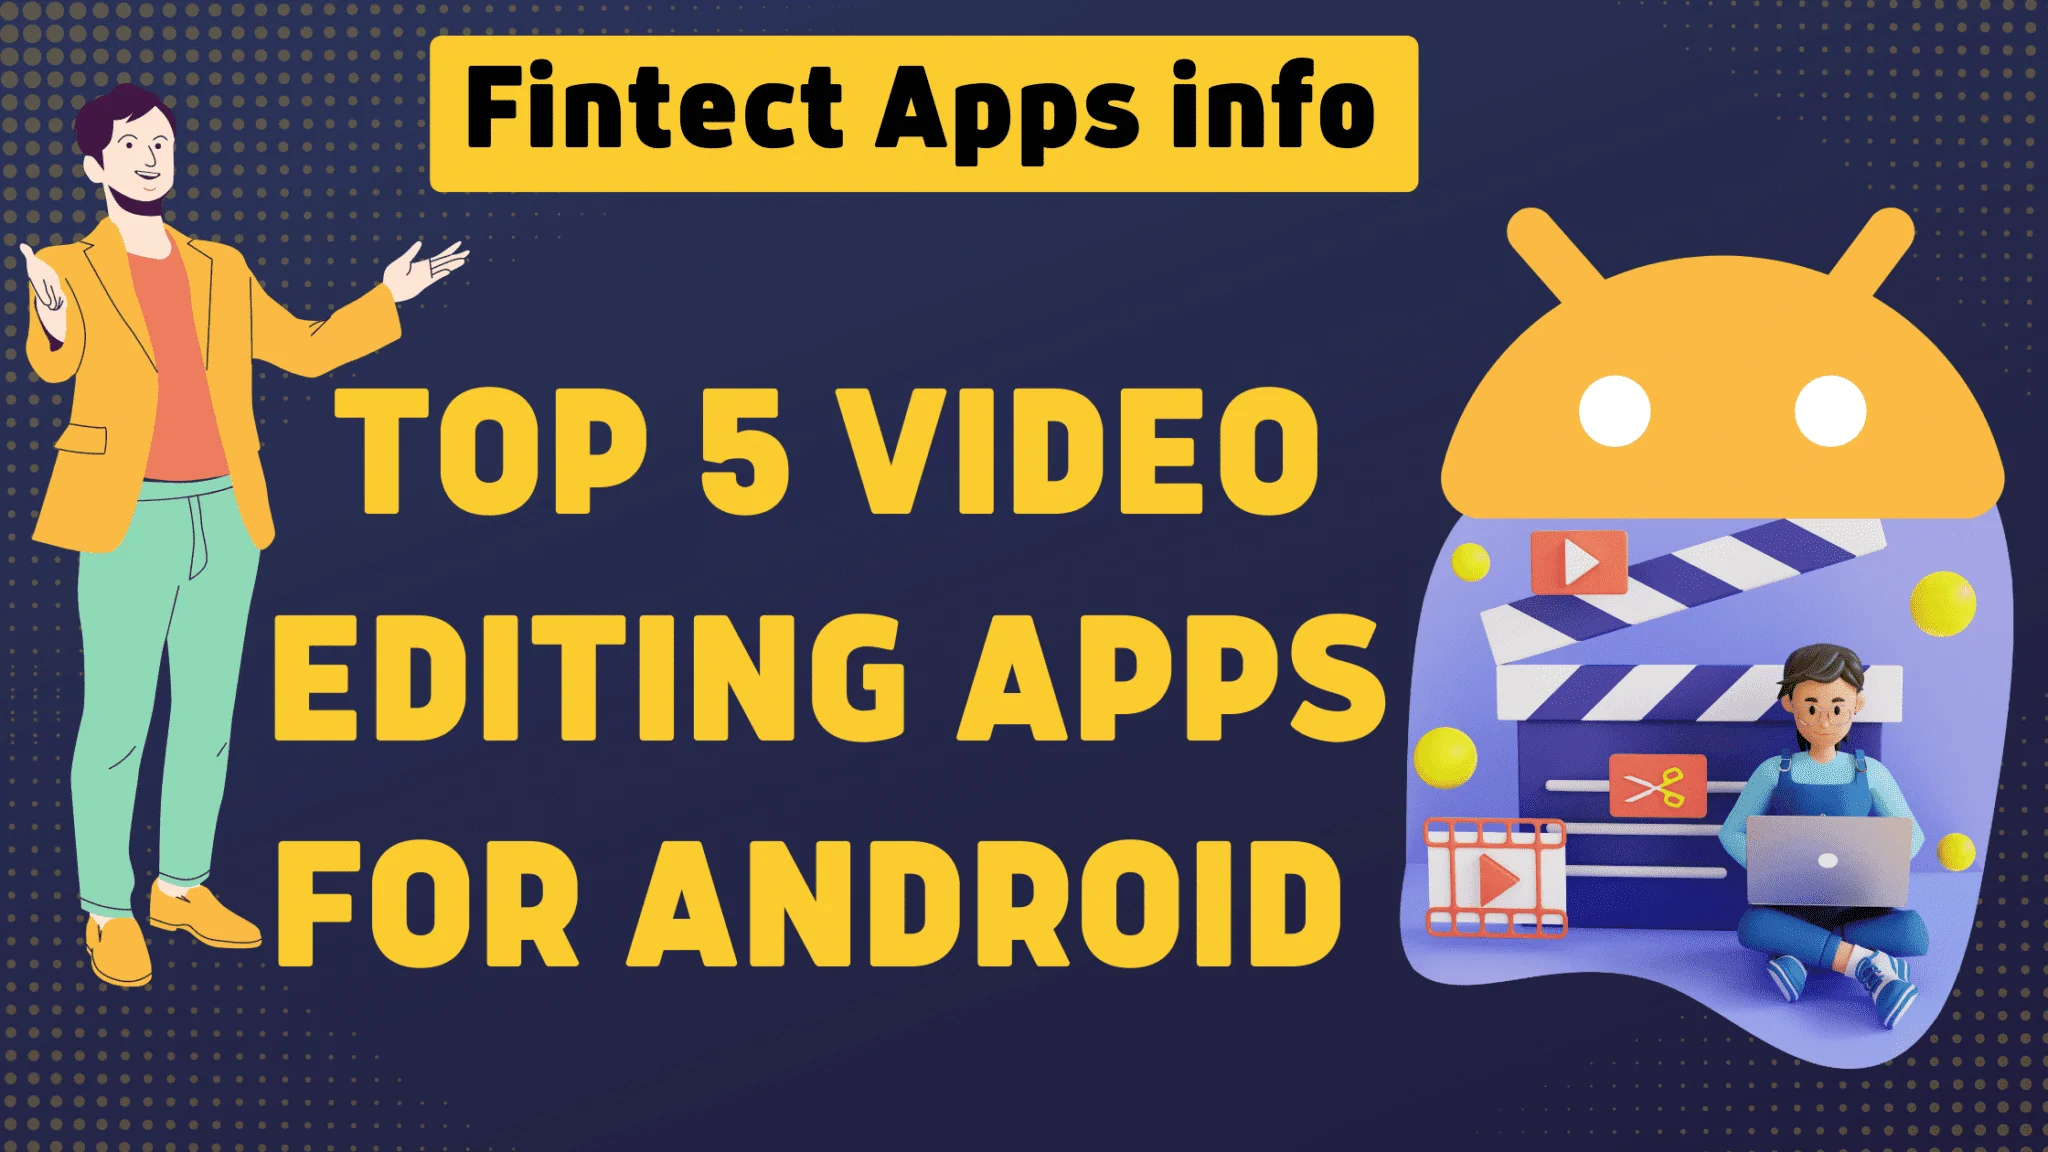 free video editing apps